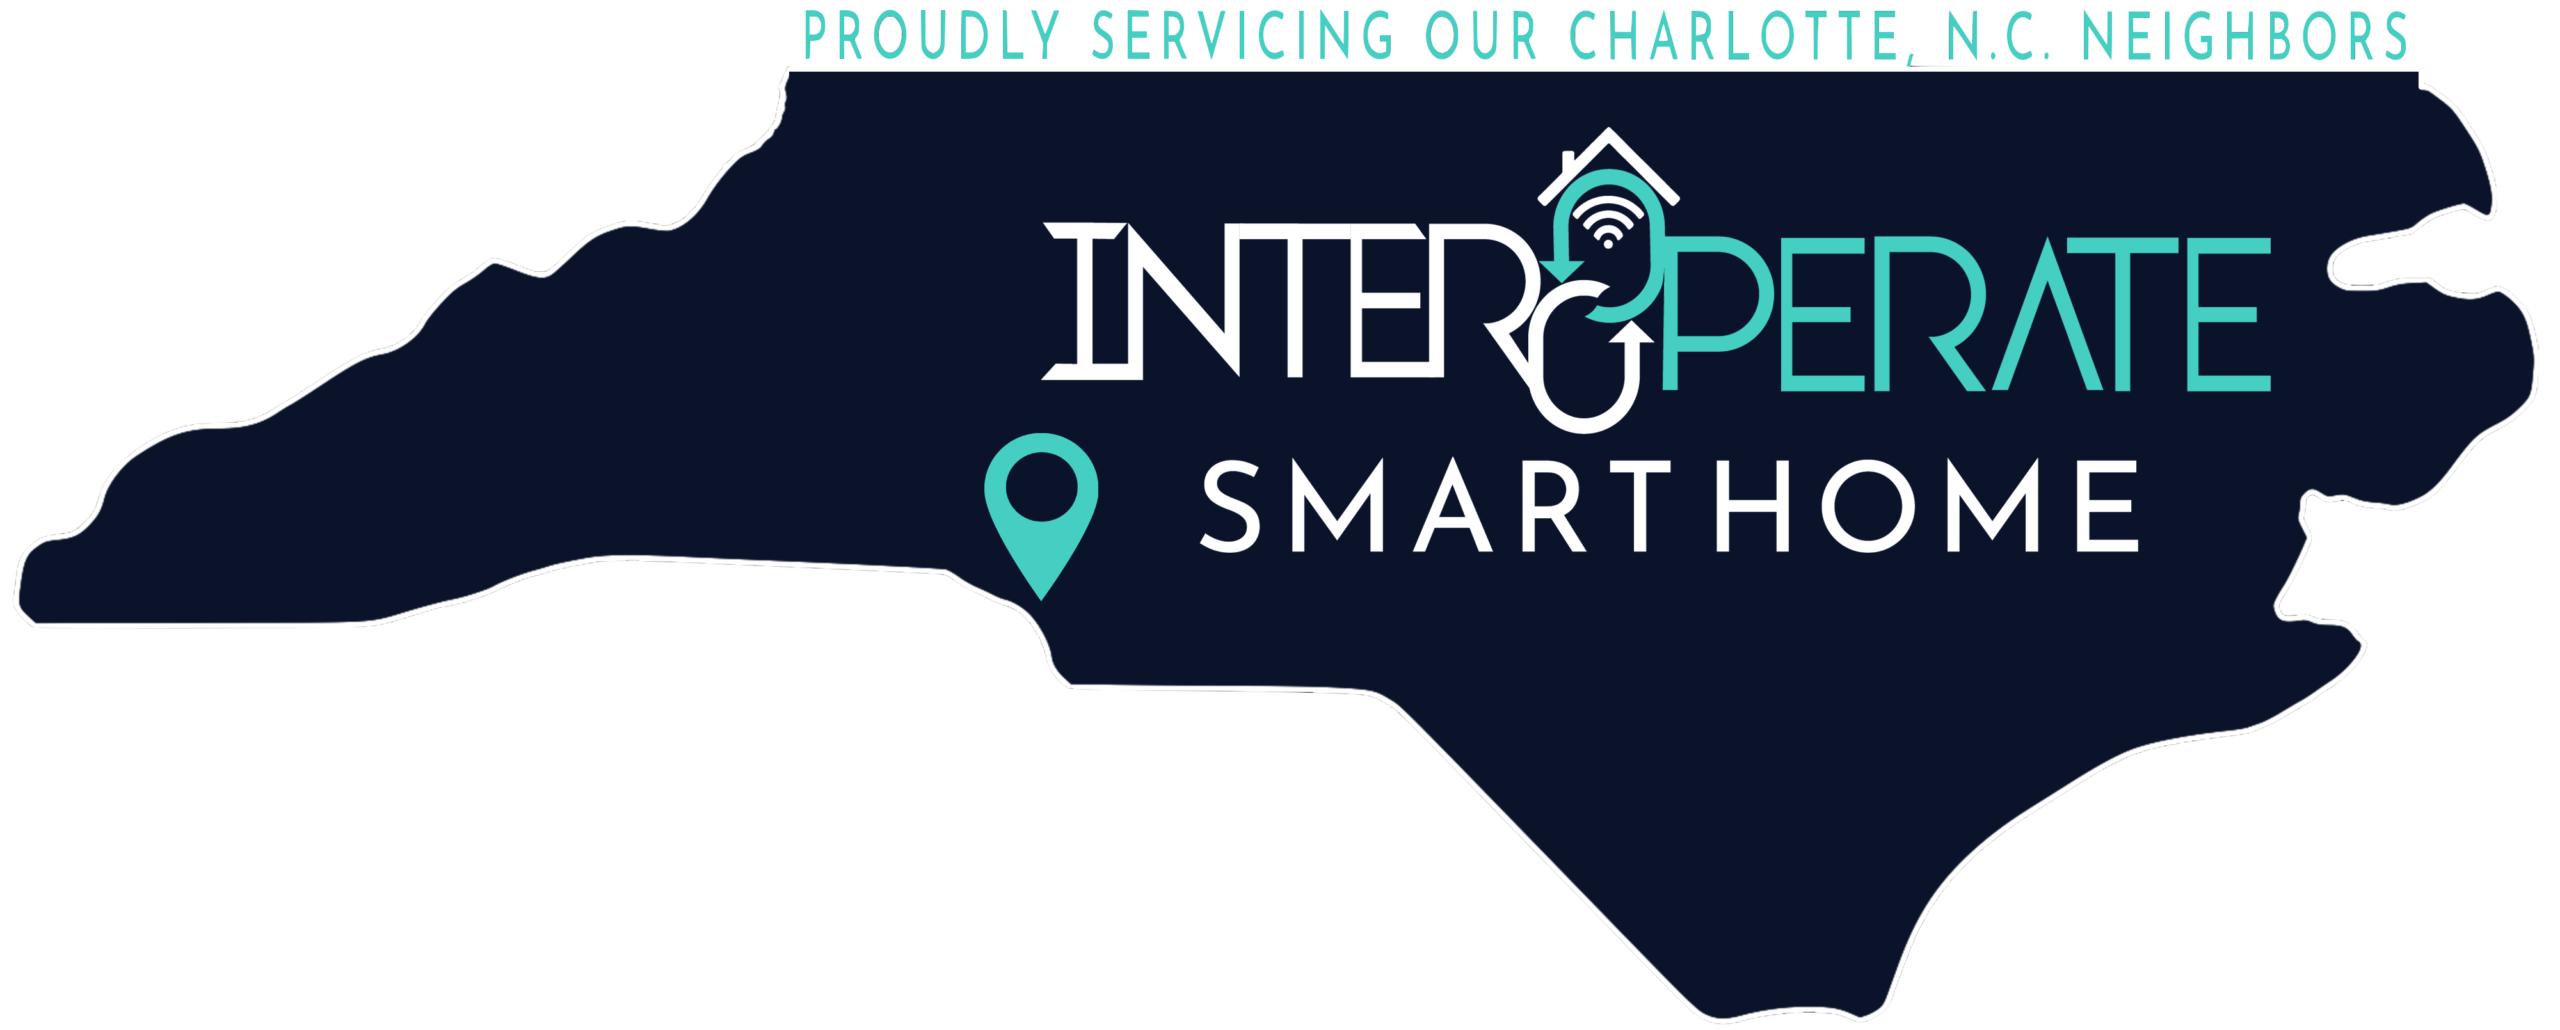 InterOperate Smart Home proudly services Charlotte, N.C.